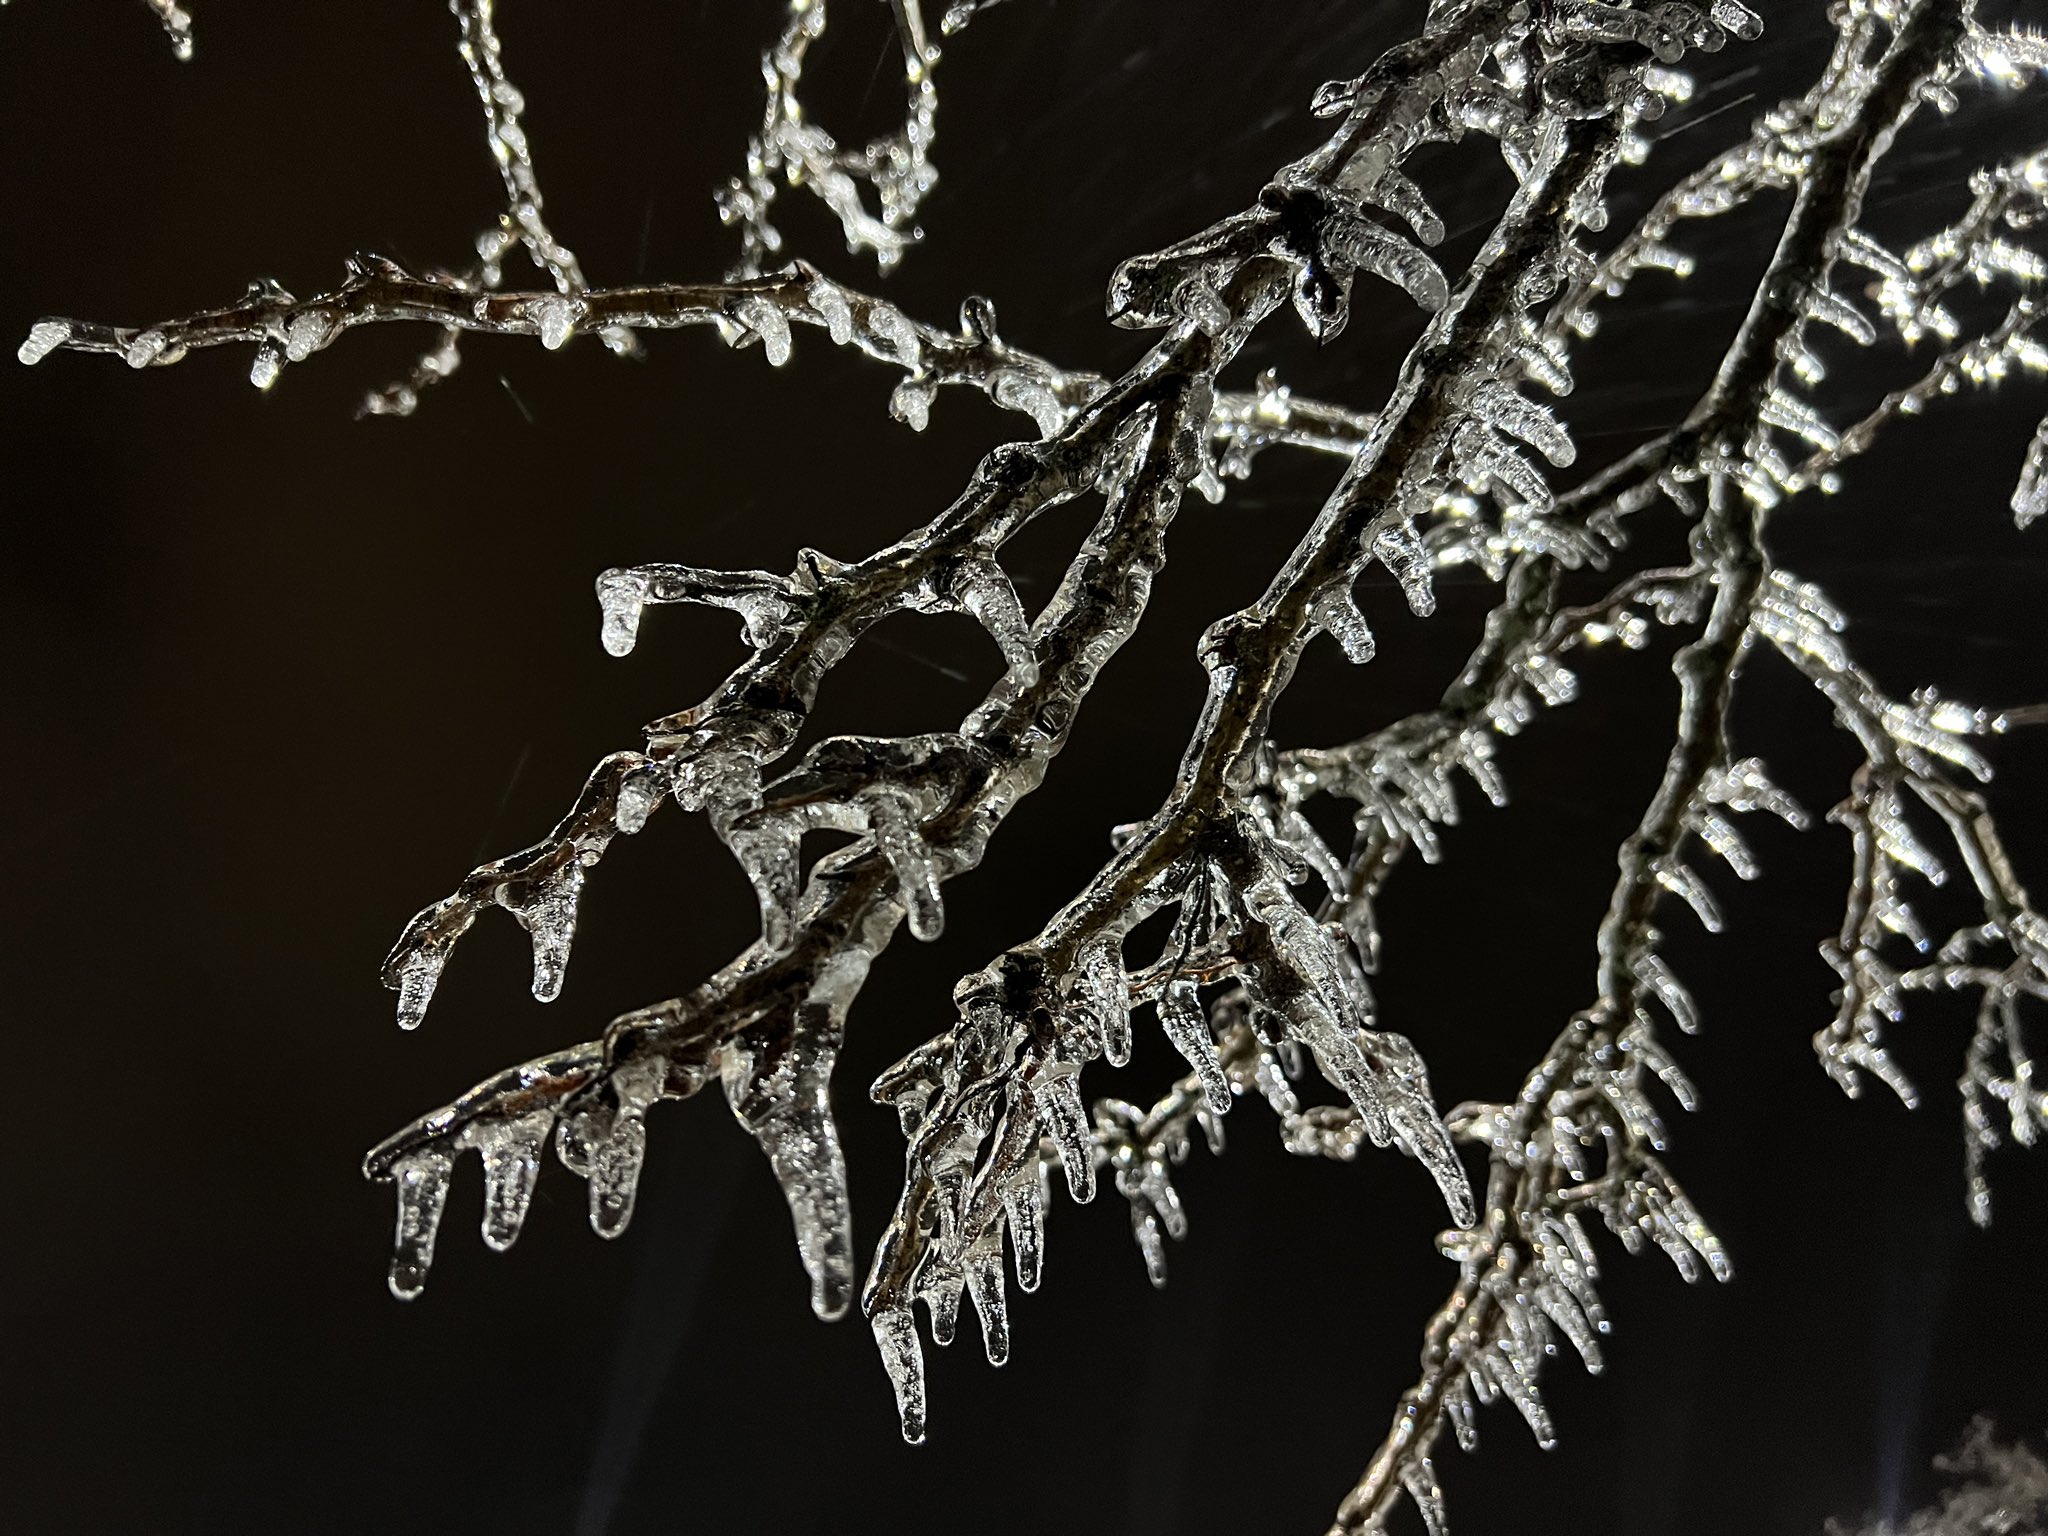 Photo showing ice accretion on tree branches in DeKalb, IL